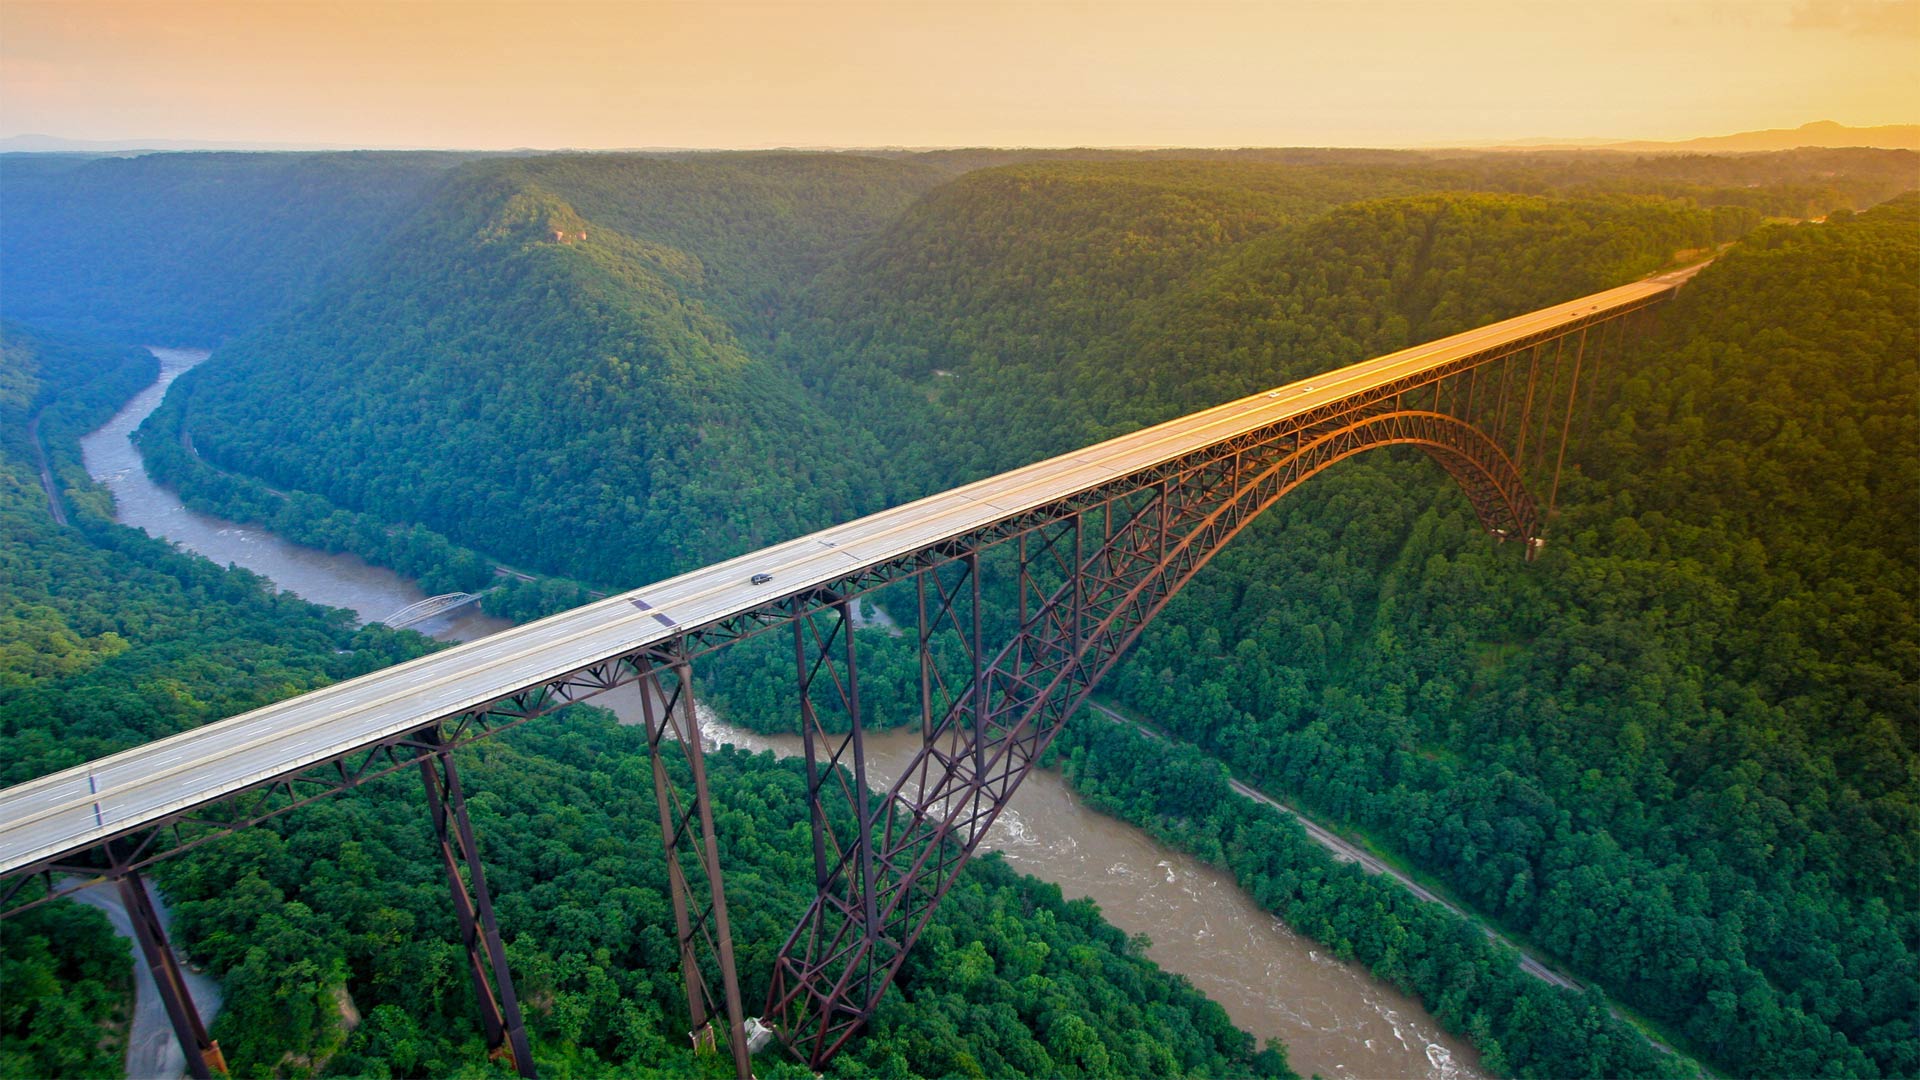 New River Gorge Bridge in the New River Gorge National Park and Preserve, West Virginia - Entropy Workshop/iStock/Getty Images Plus)